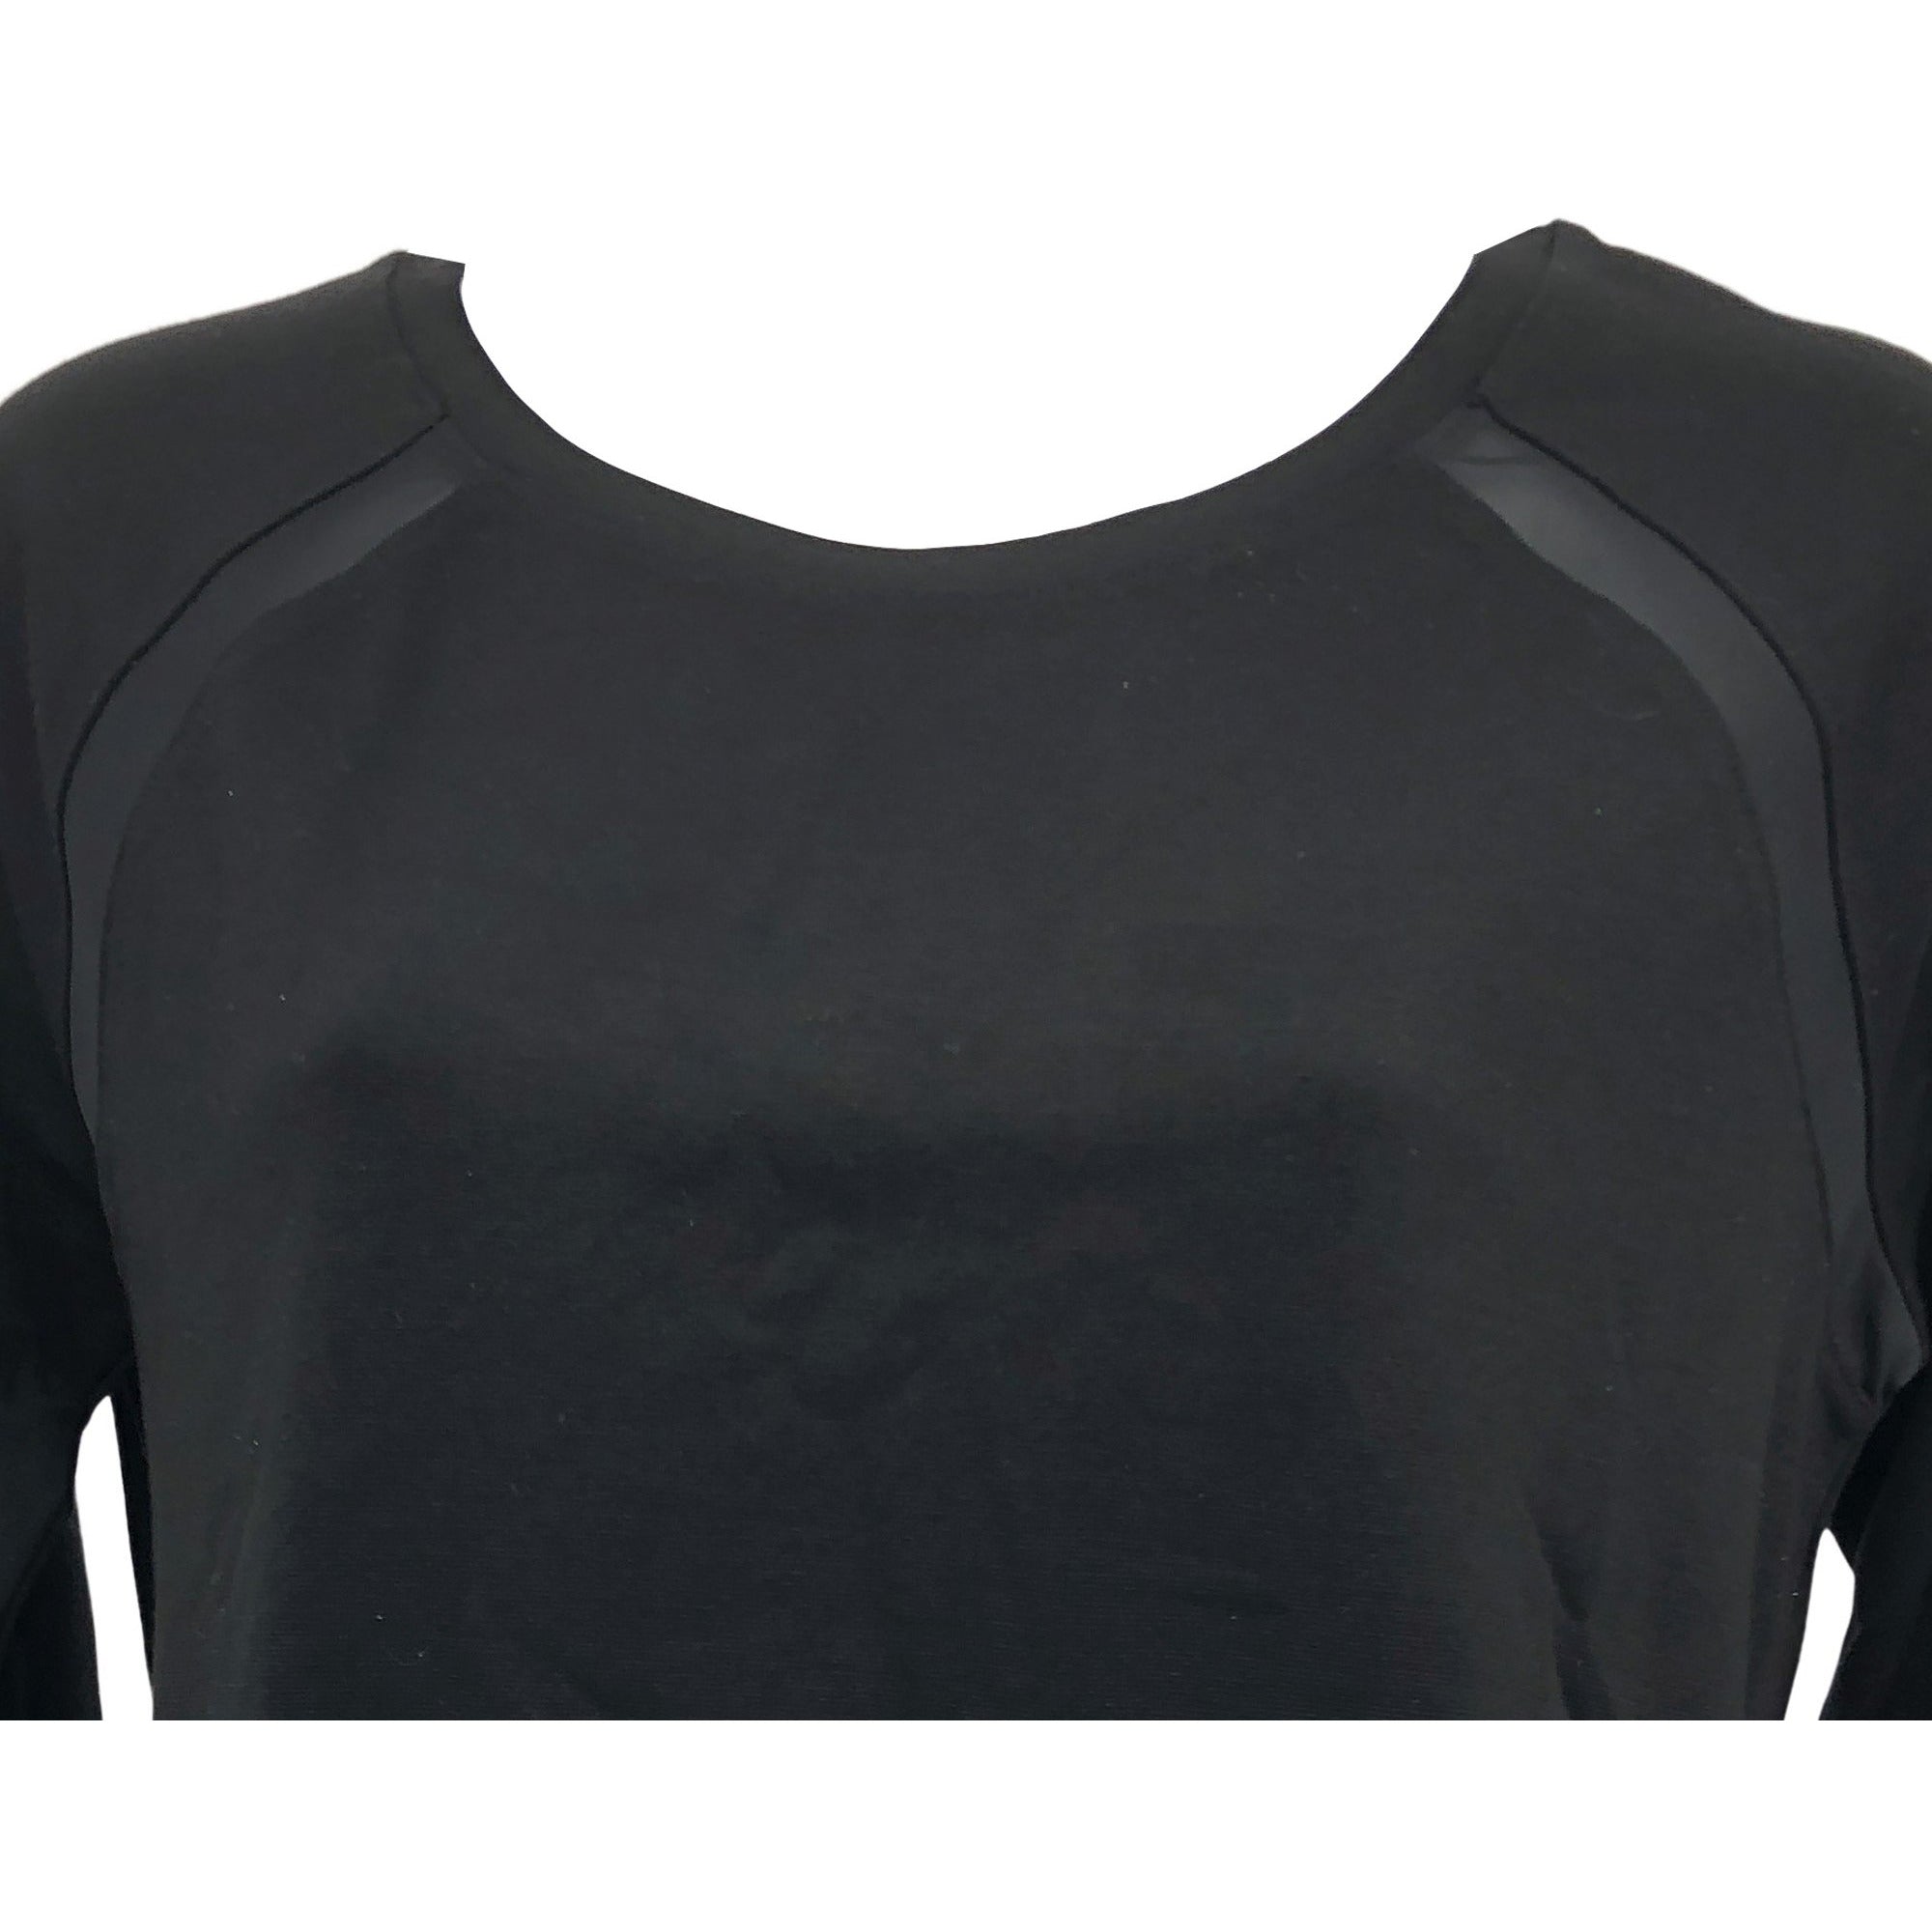 Kenneth Cole Reaction Women's Active Wear Shirt / 3/4 Length Sleeves / Black / Size Small